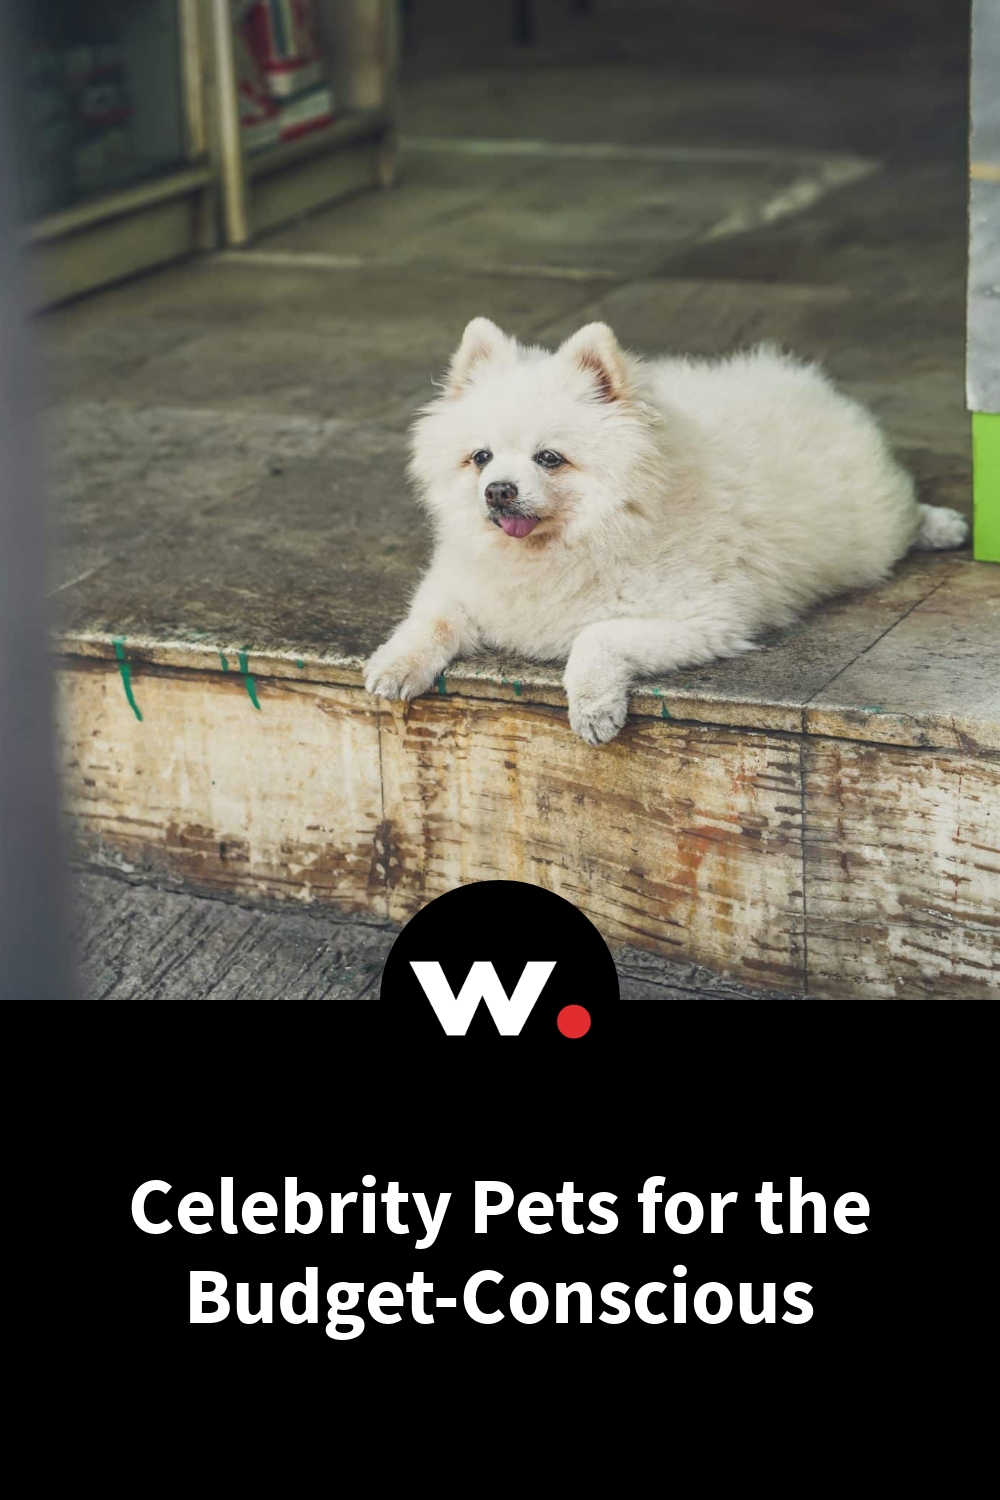 Celebrity Pets for the Budget-Conscious